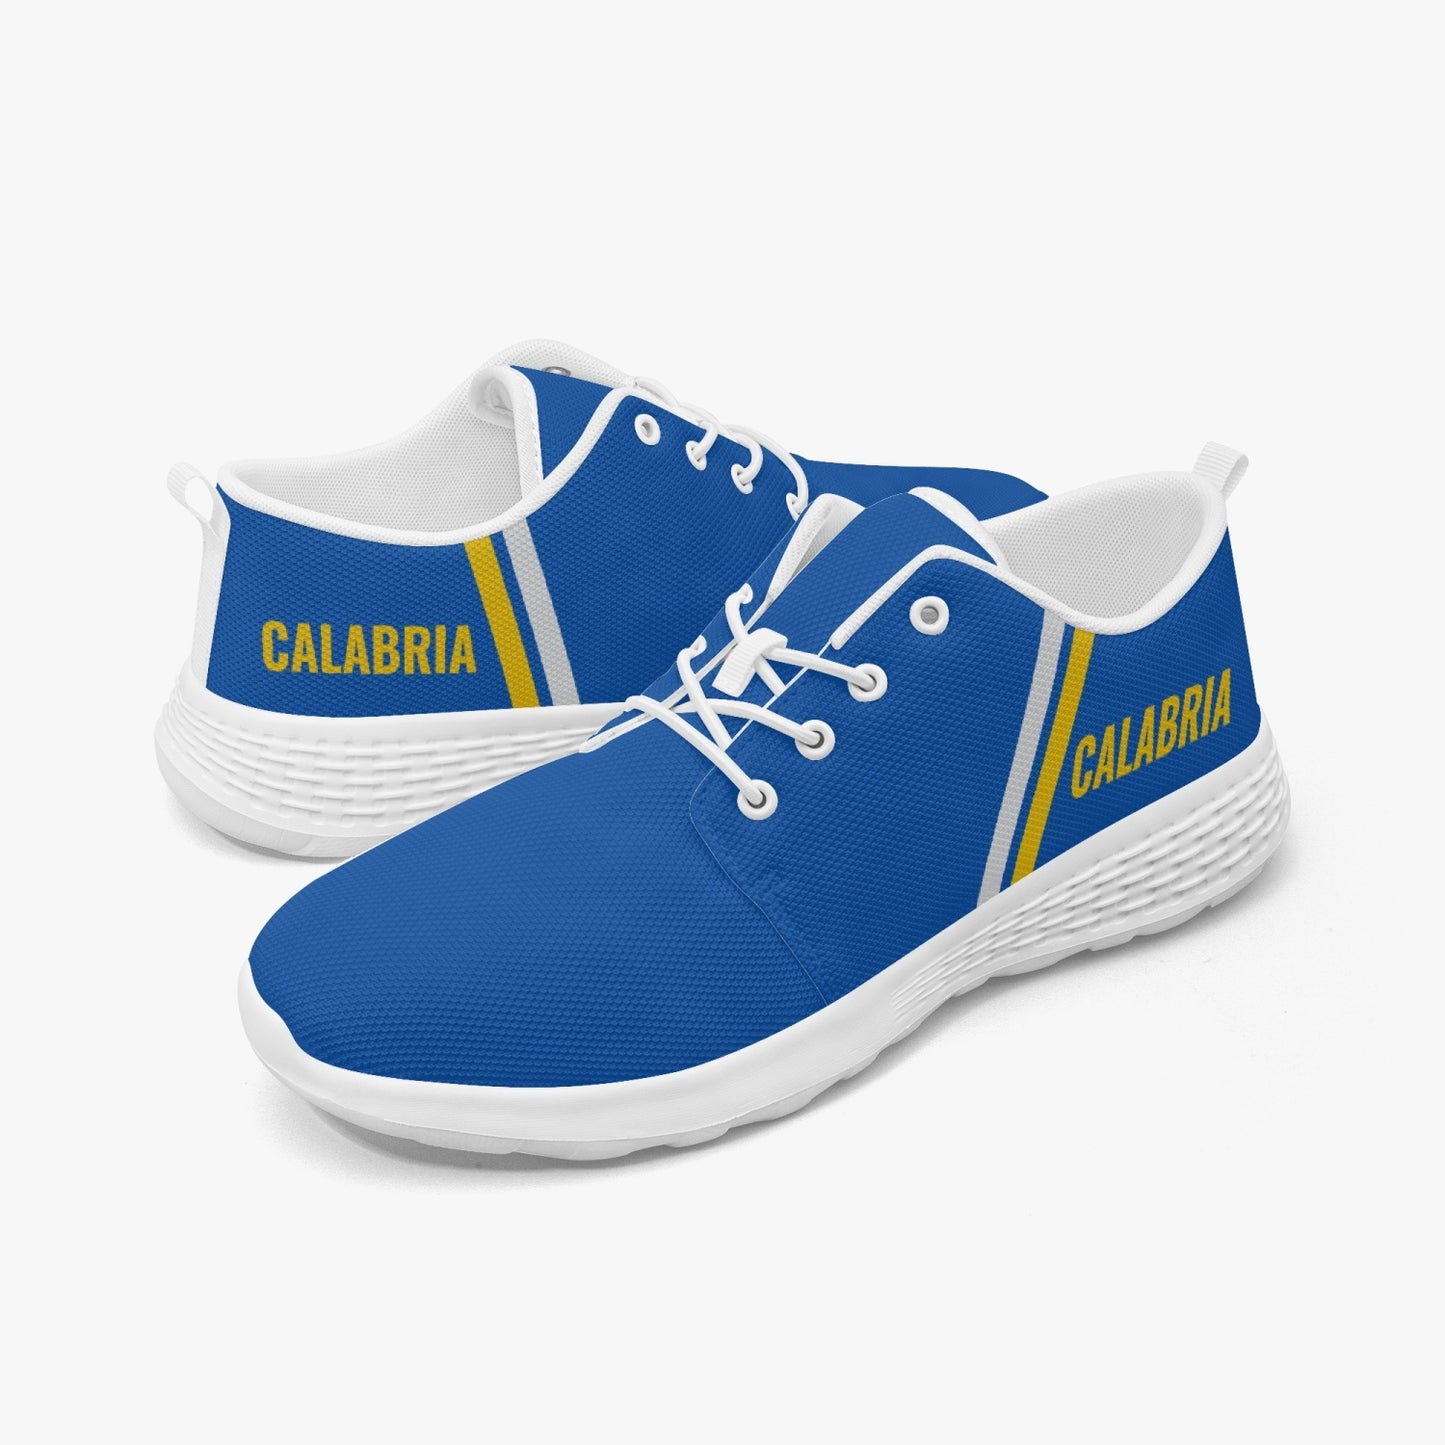 Italy Running Shoes - Forza Calabria - men's /women's sizes